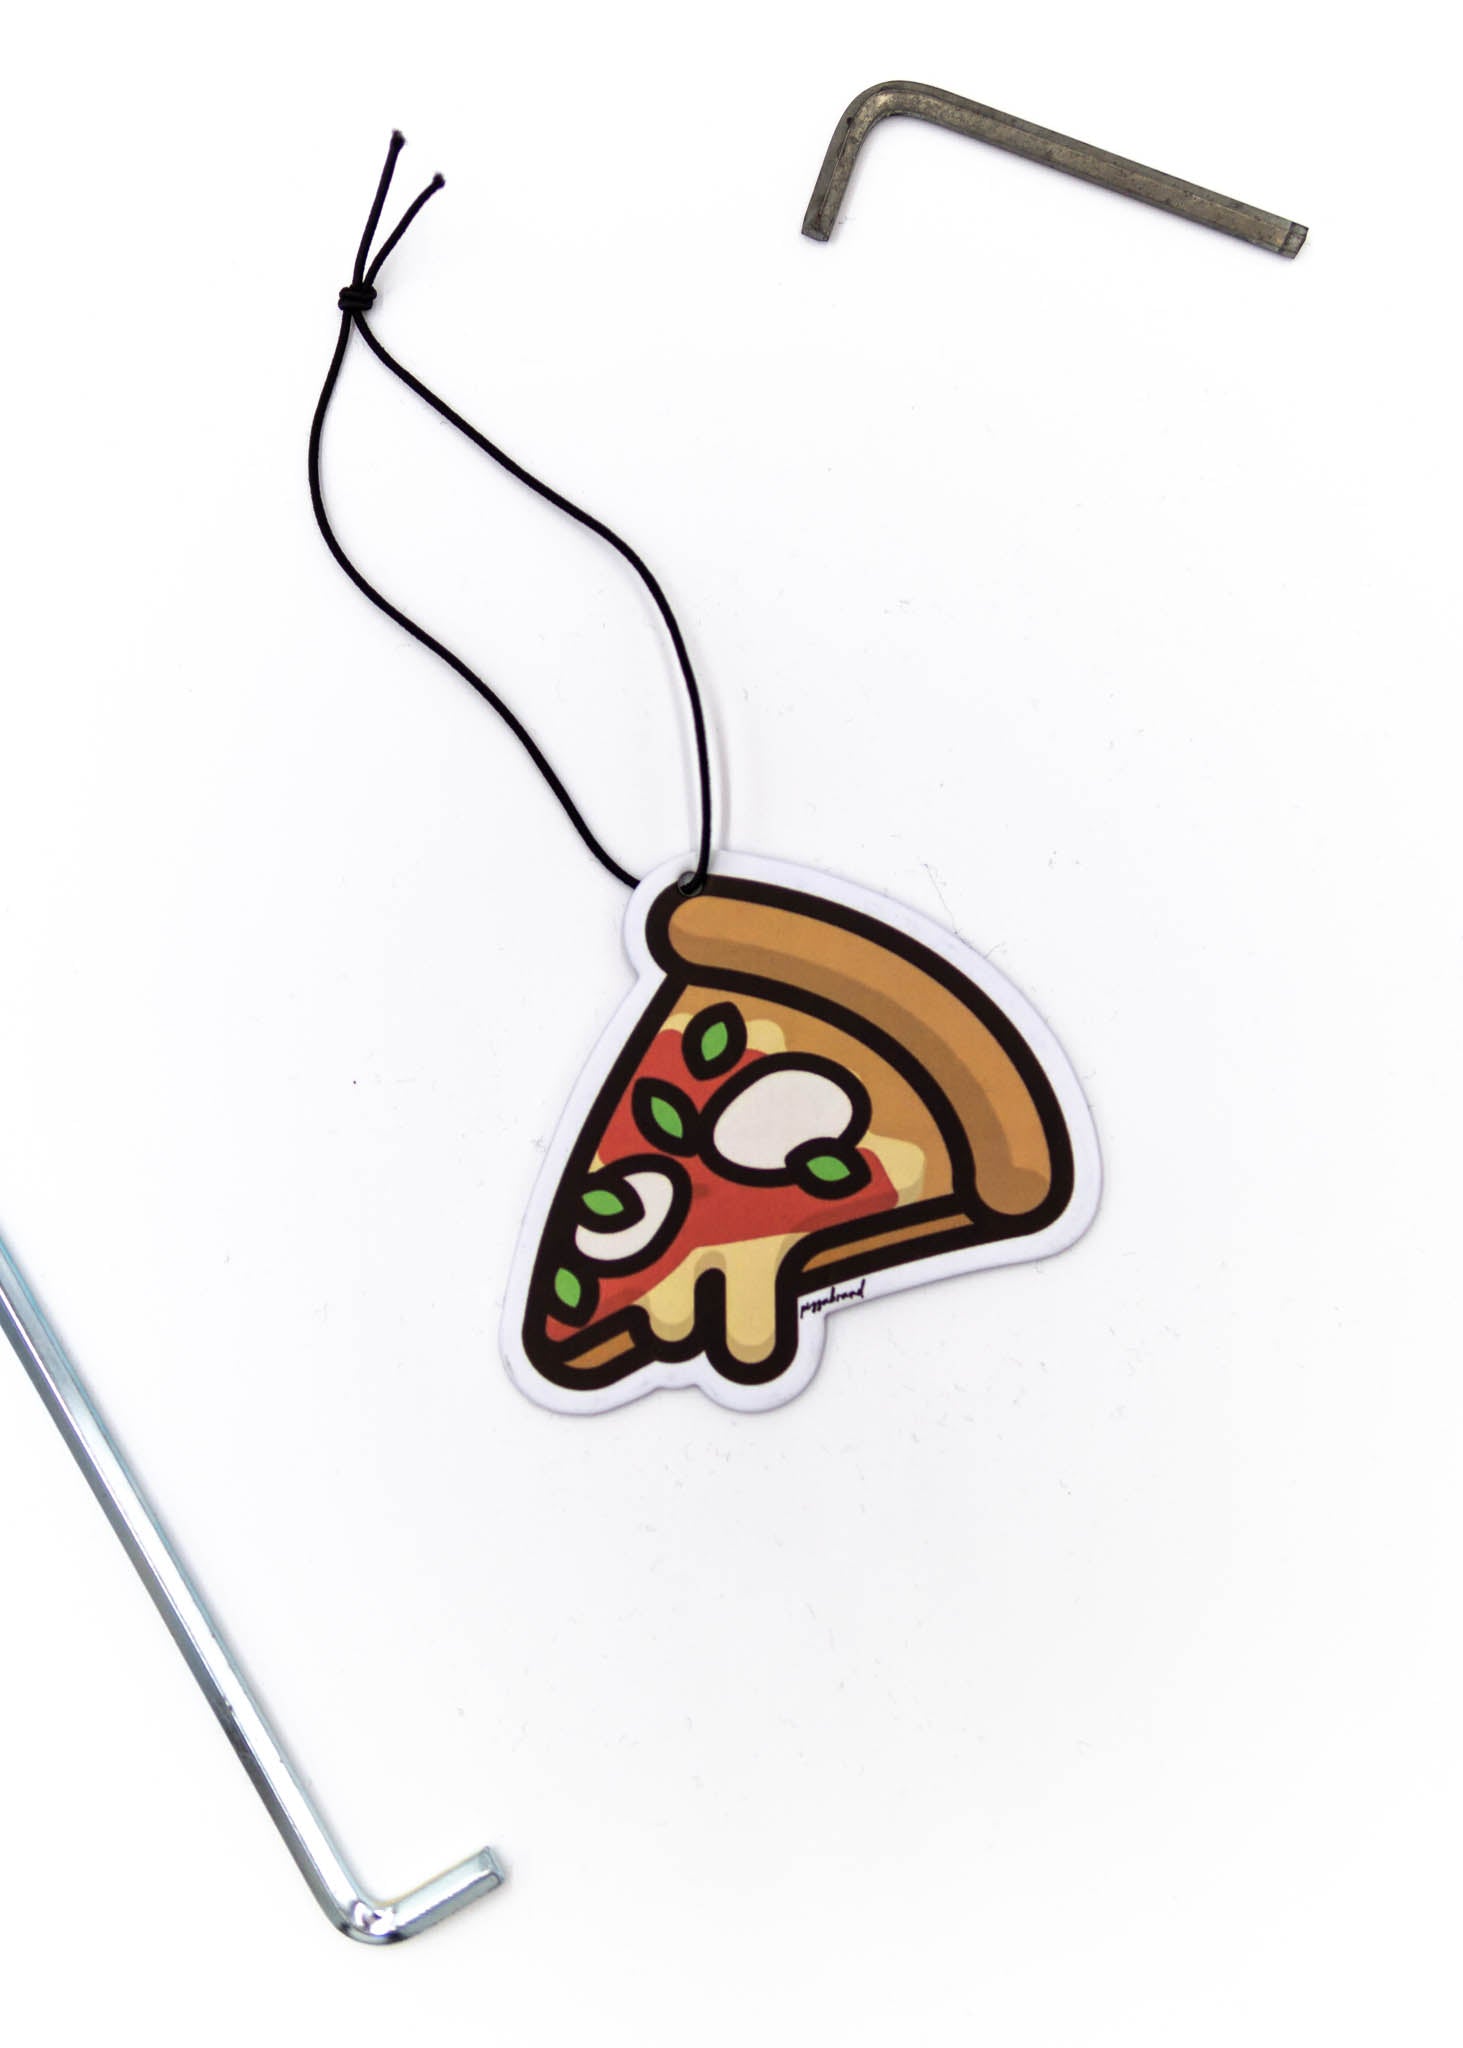 A pizzabrand margherita pizza air freshener. Photo is a close up of the car air freshener with string.